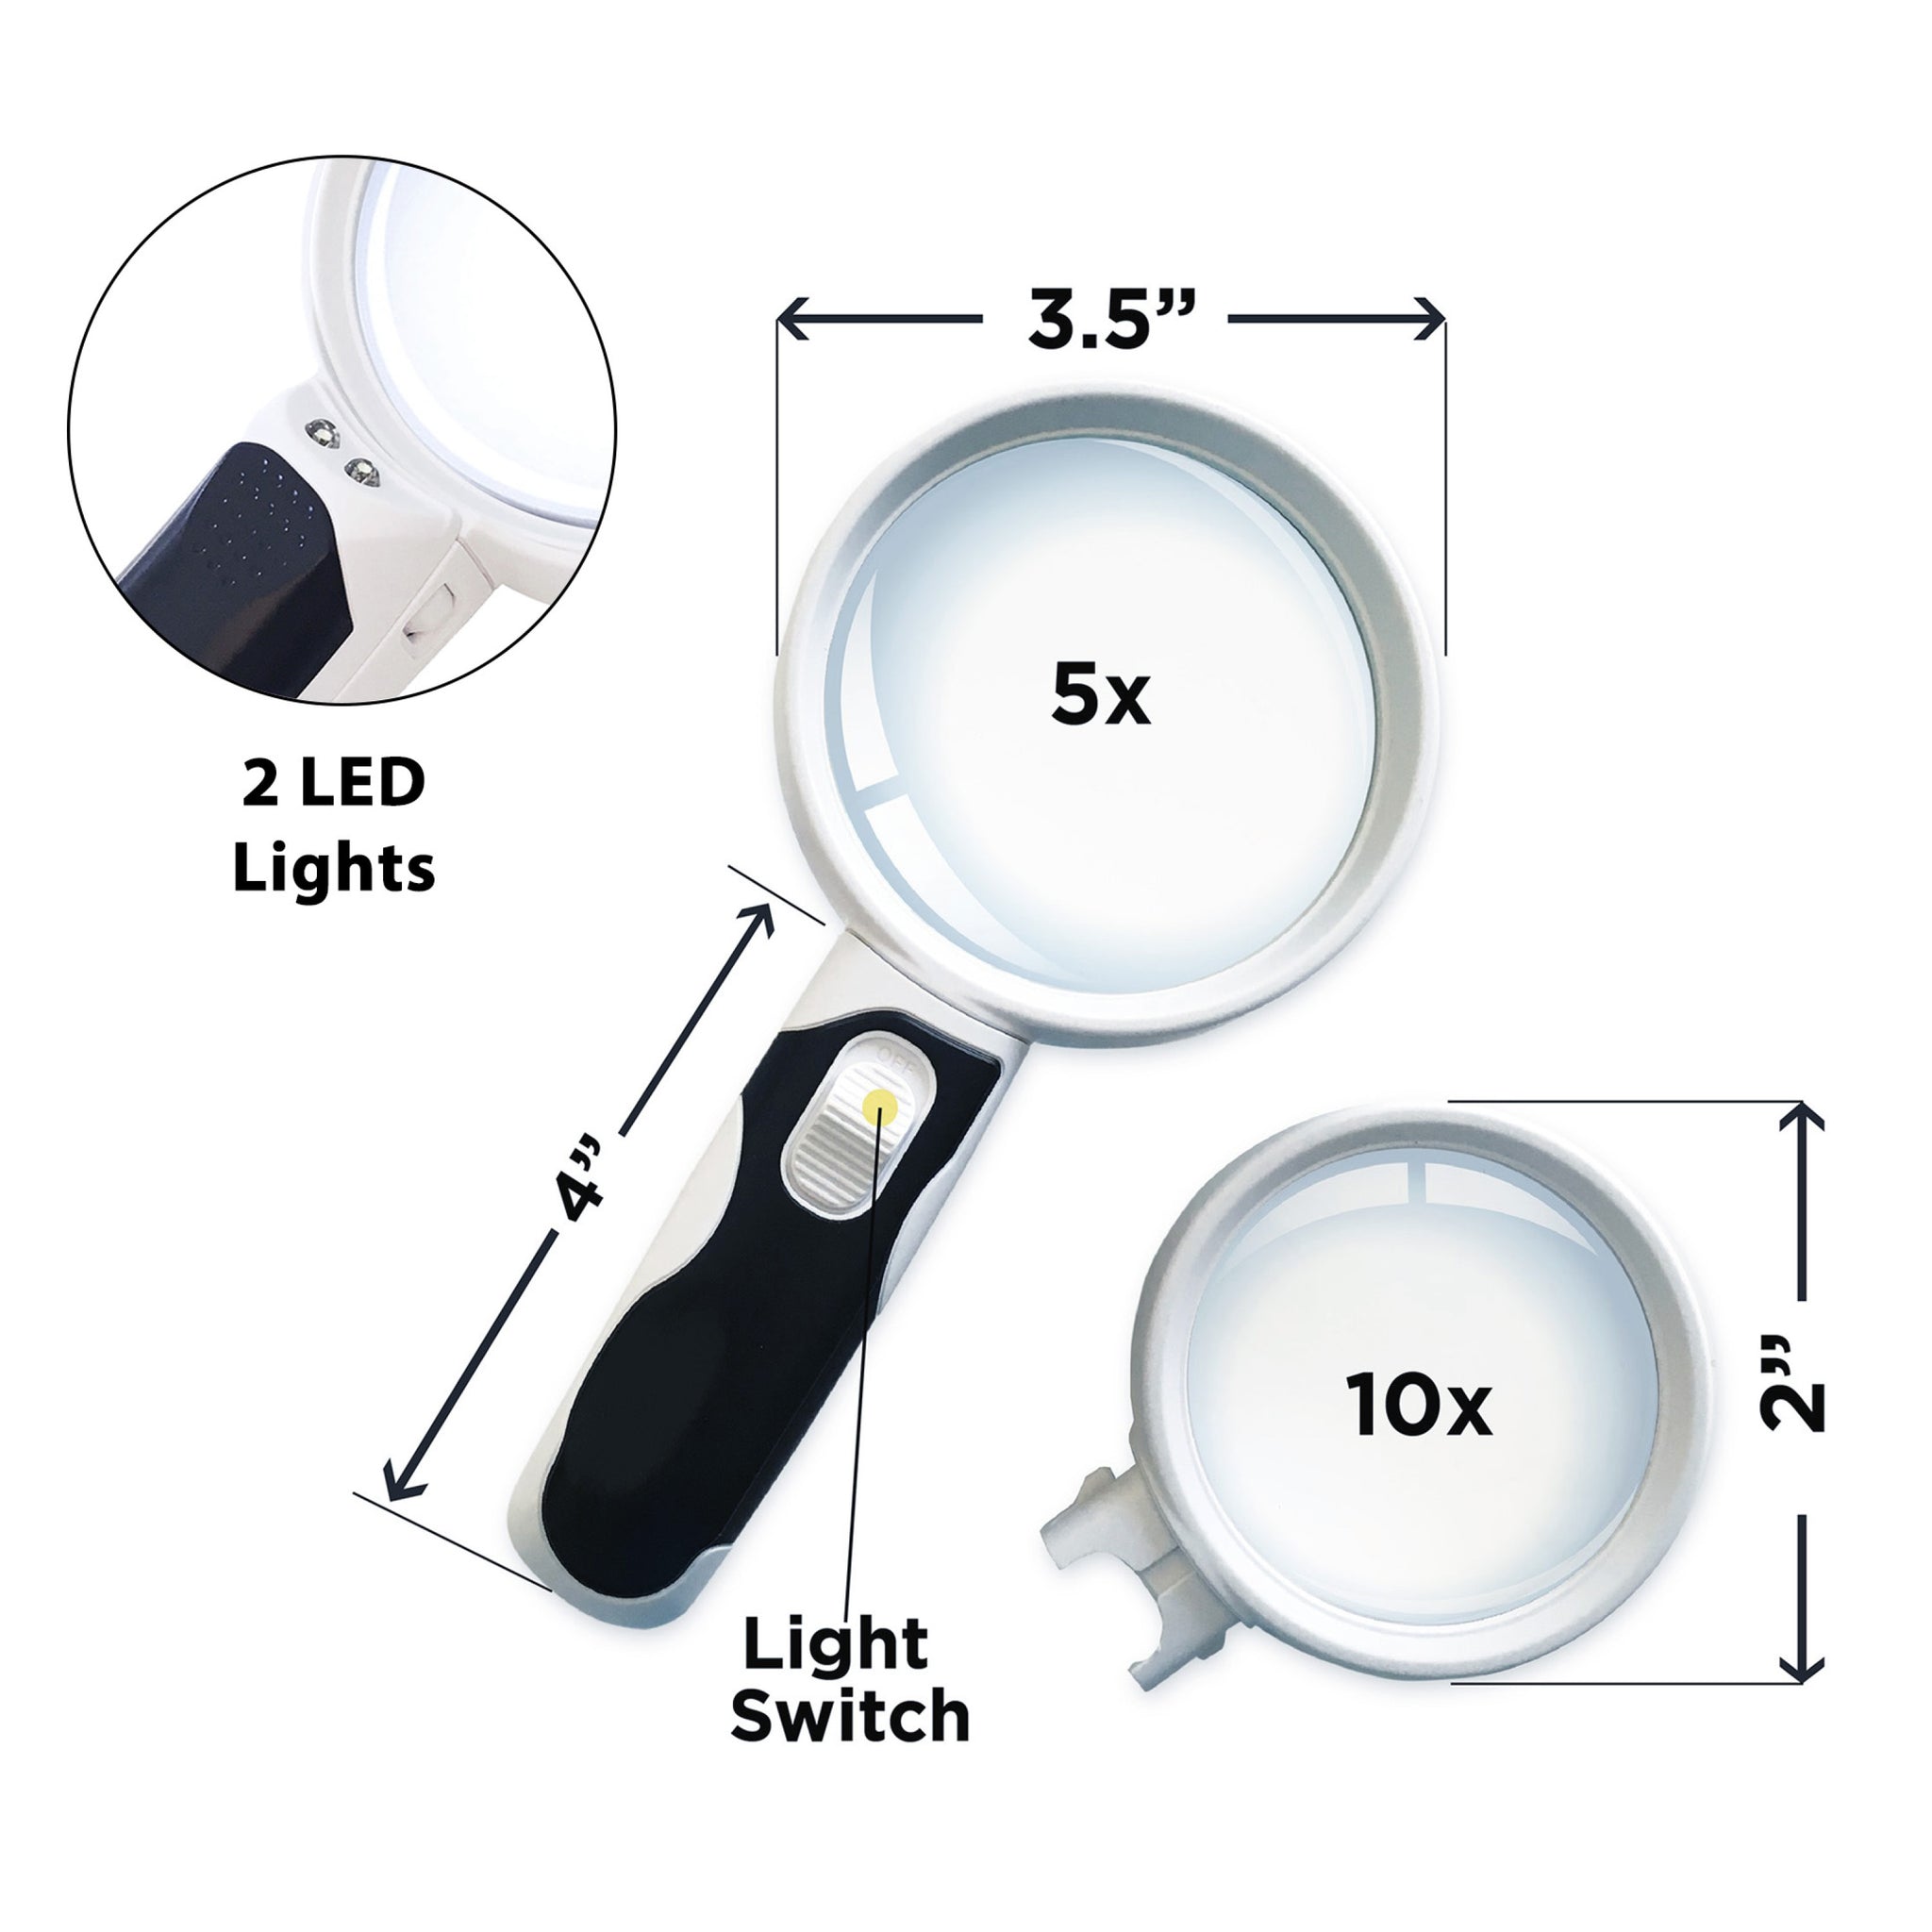 5 inch 10x Handheld Magnifying Glass - Clear Glass Lens